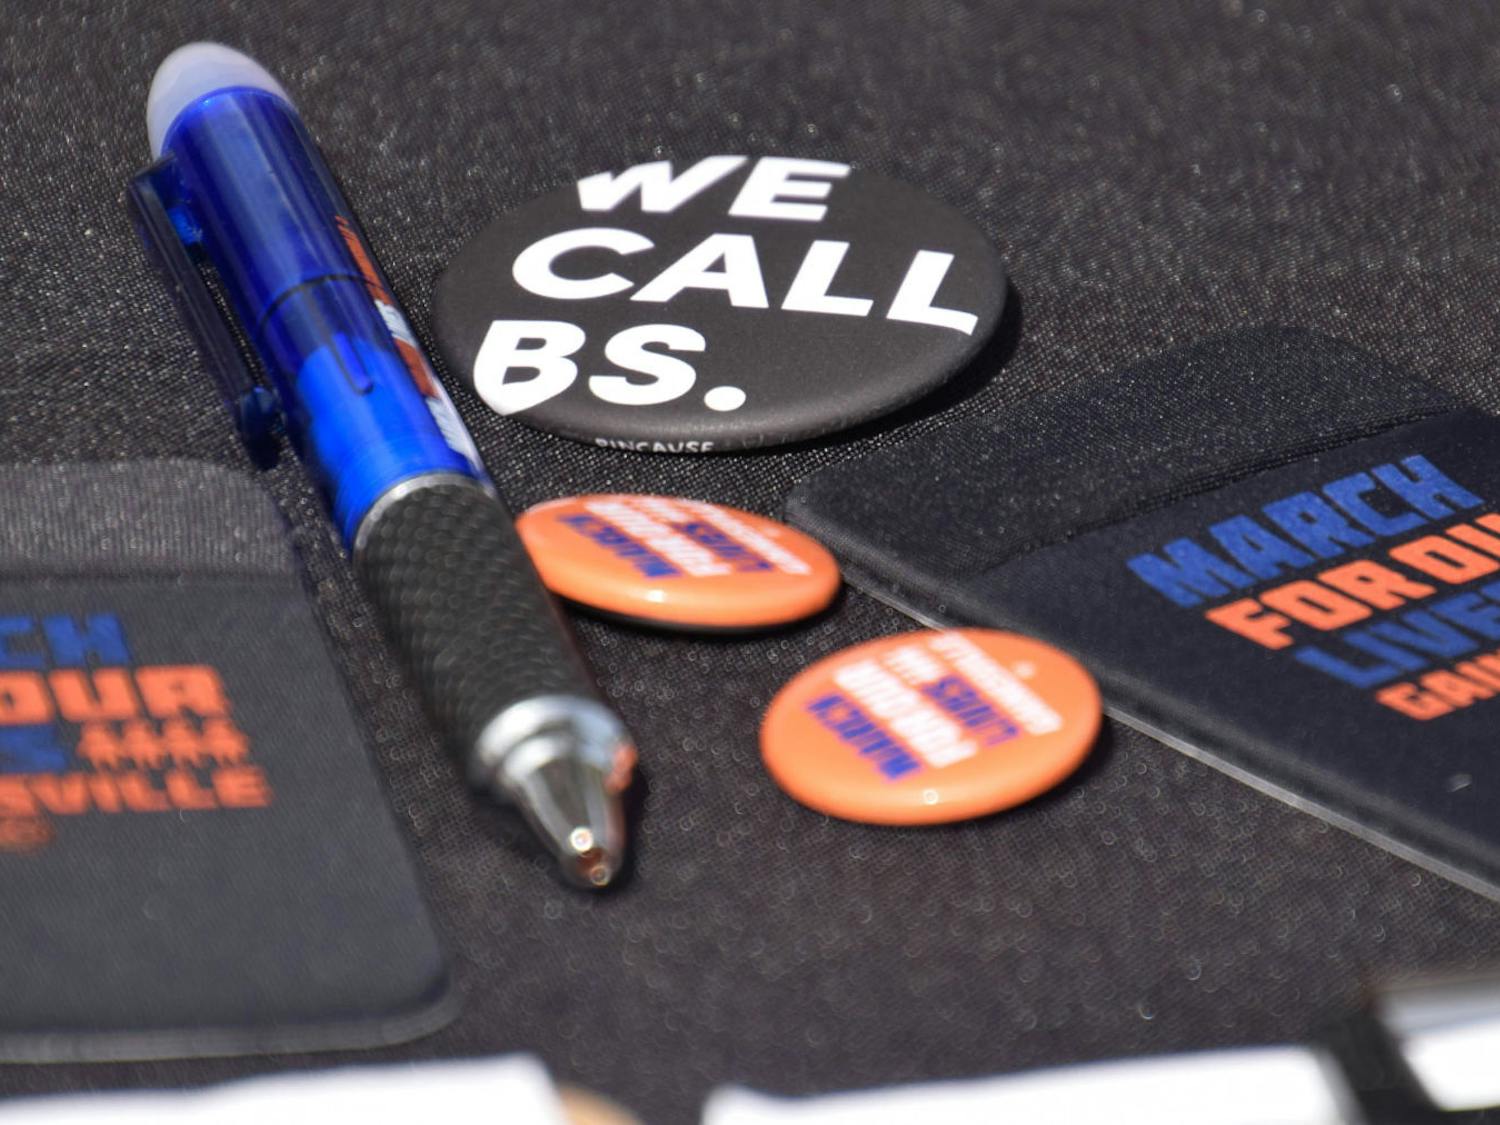 March for Our Lives Gainesville handed out pins, pens and other merchandise to students walking by.